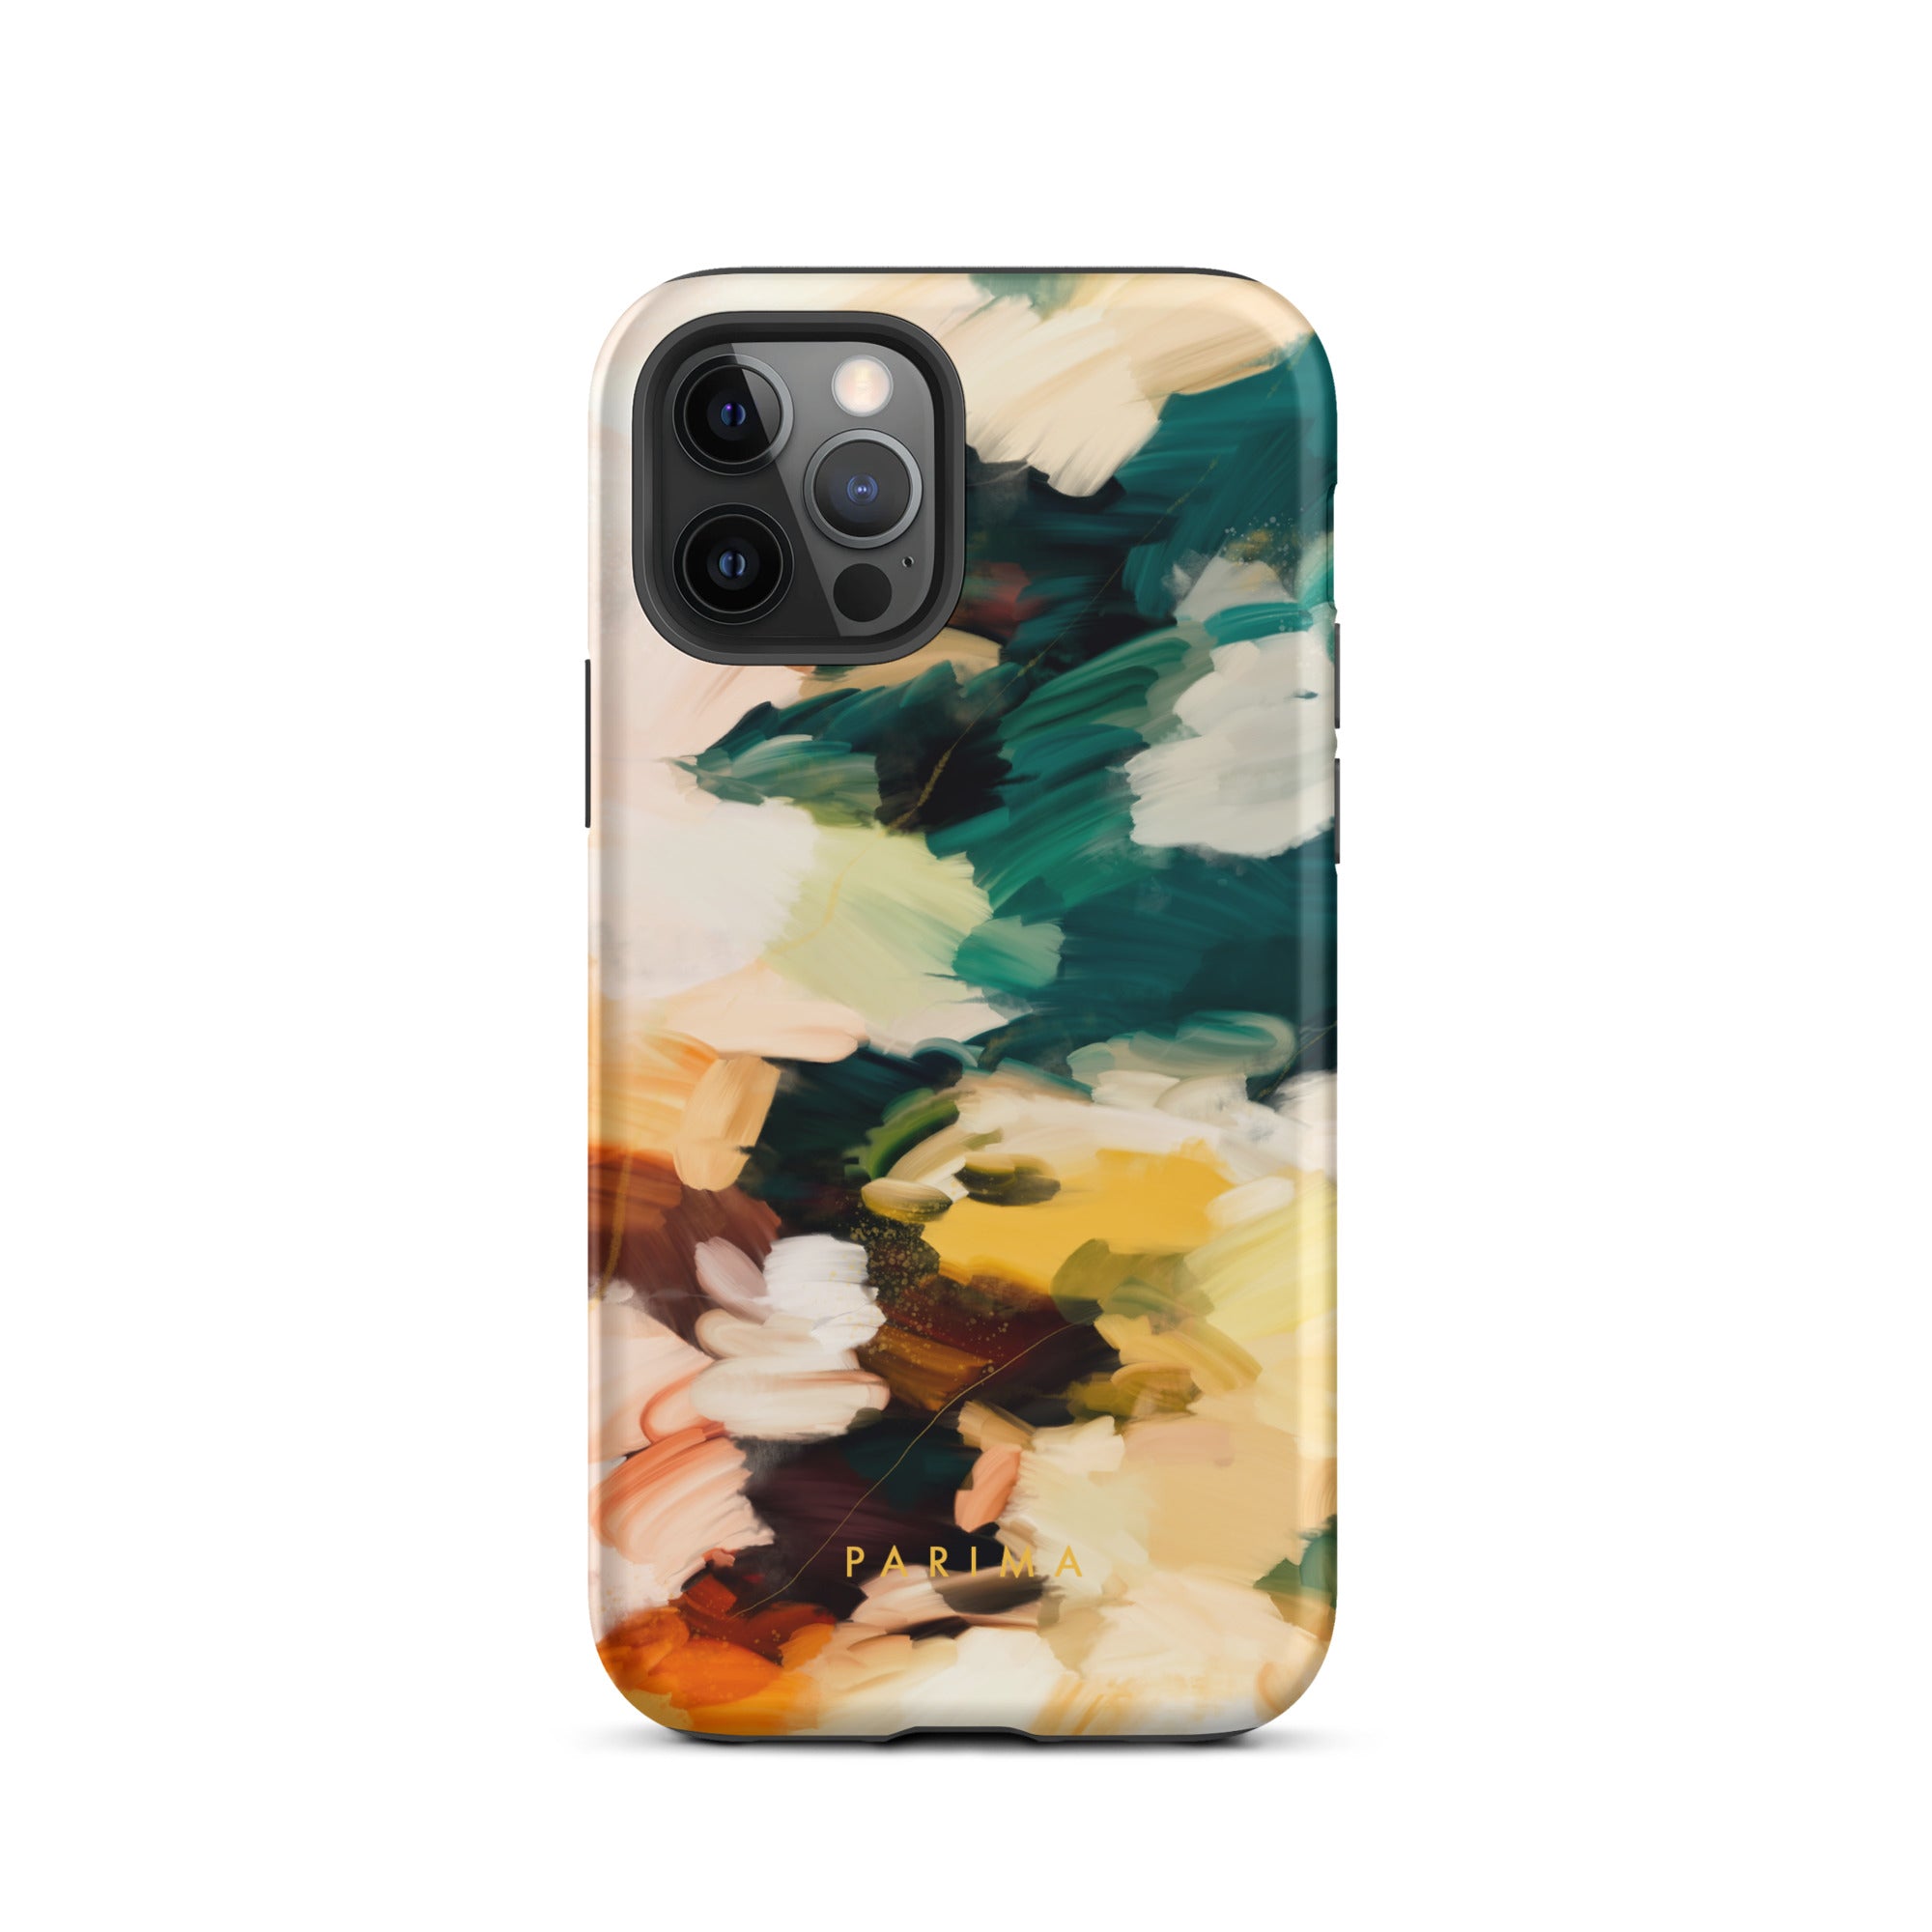 Cinque Terre, green and yellow abstract art - iPhone 12 Pro tough case by Parima Studio